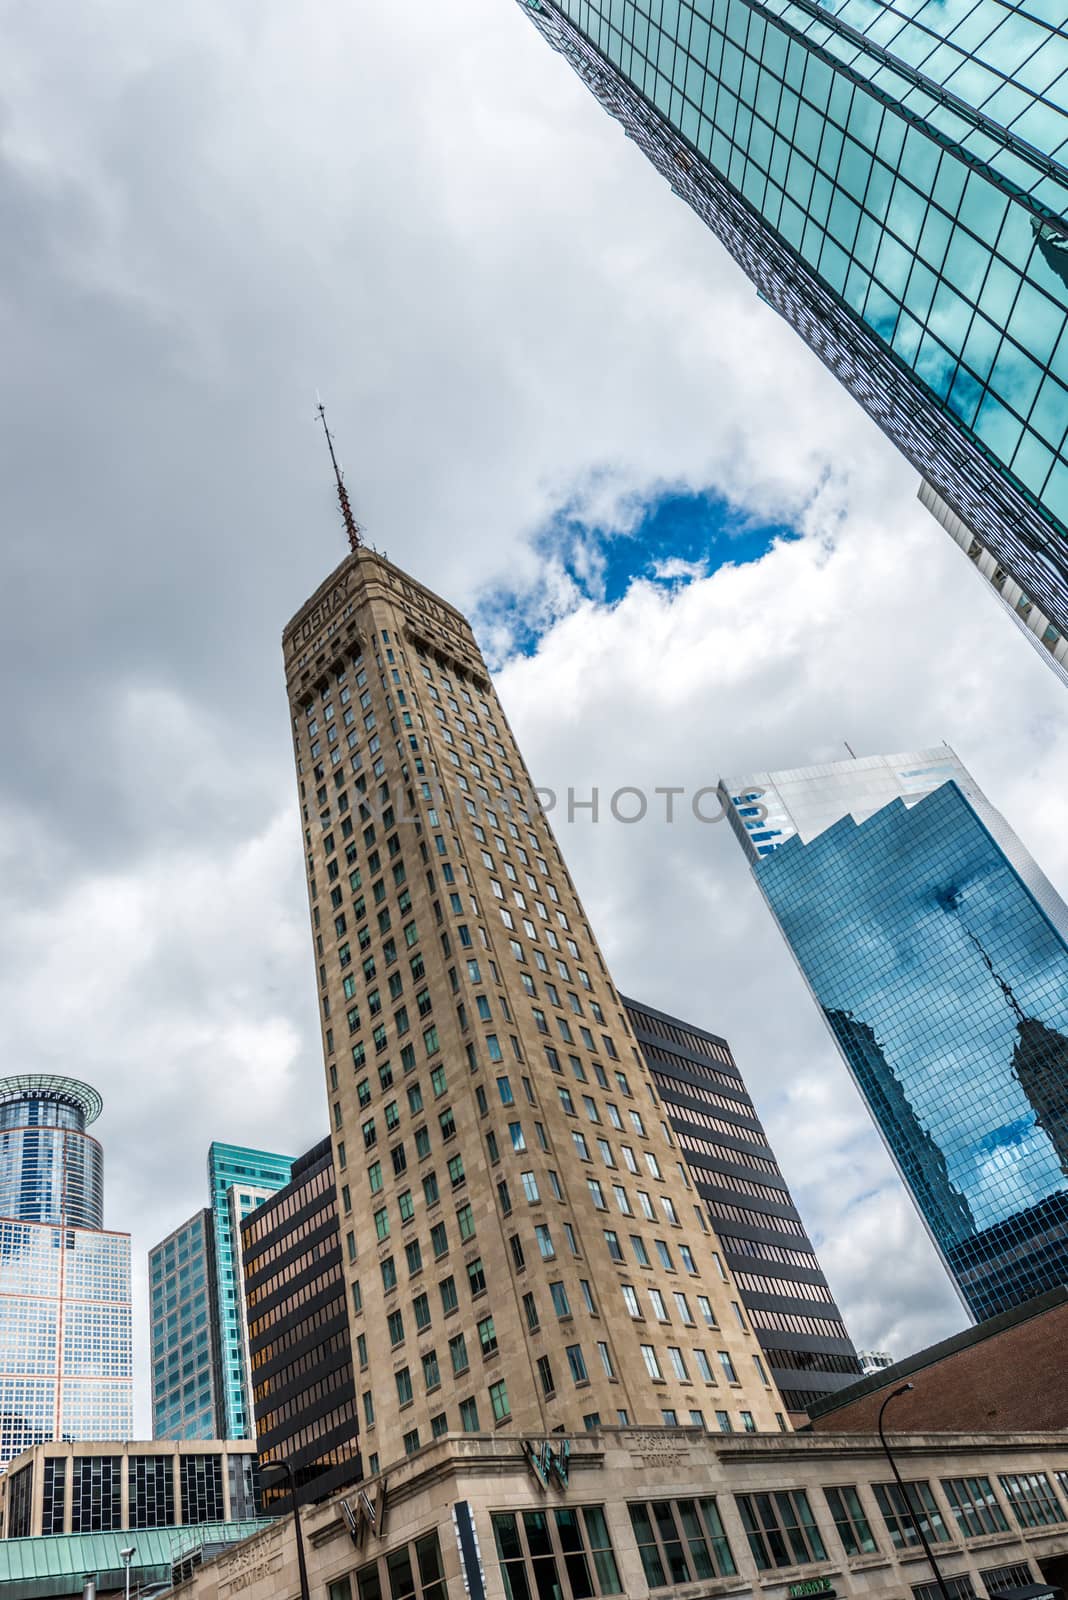 Foshay Tower of Minneapolis by IVYPHOTOS